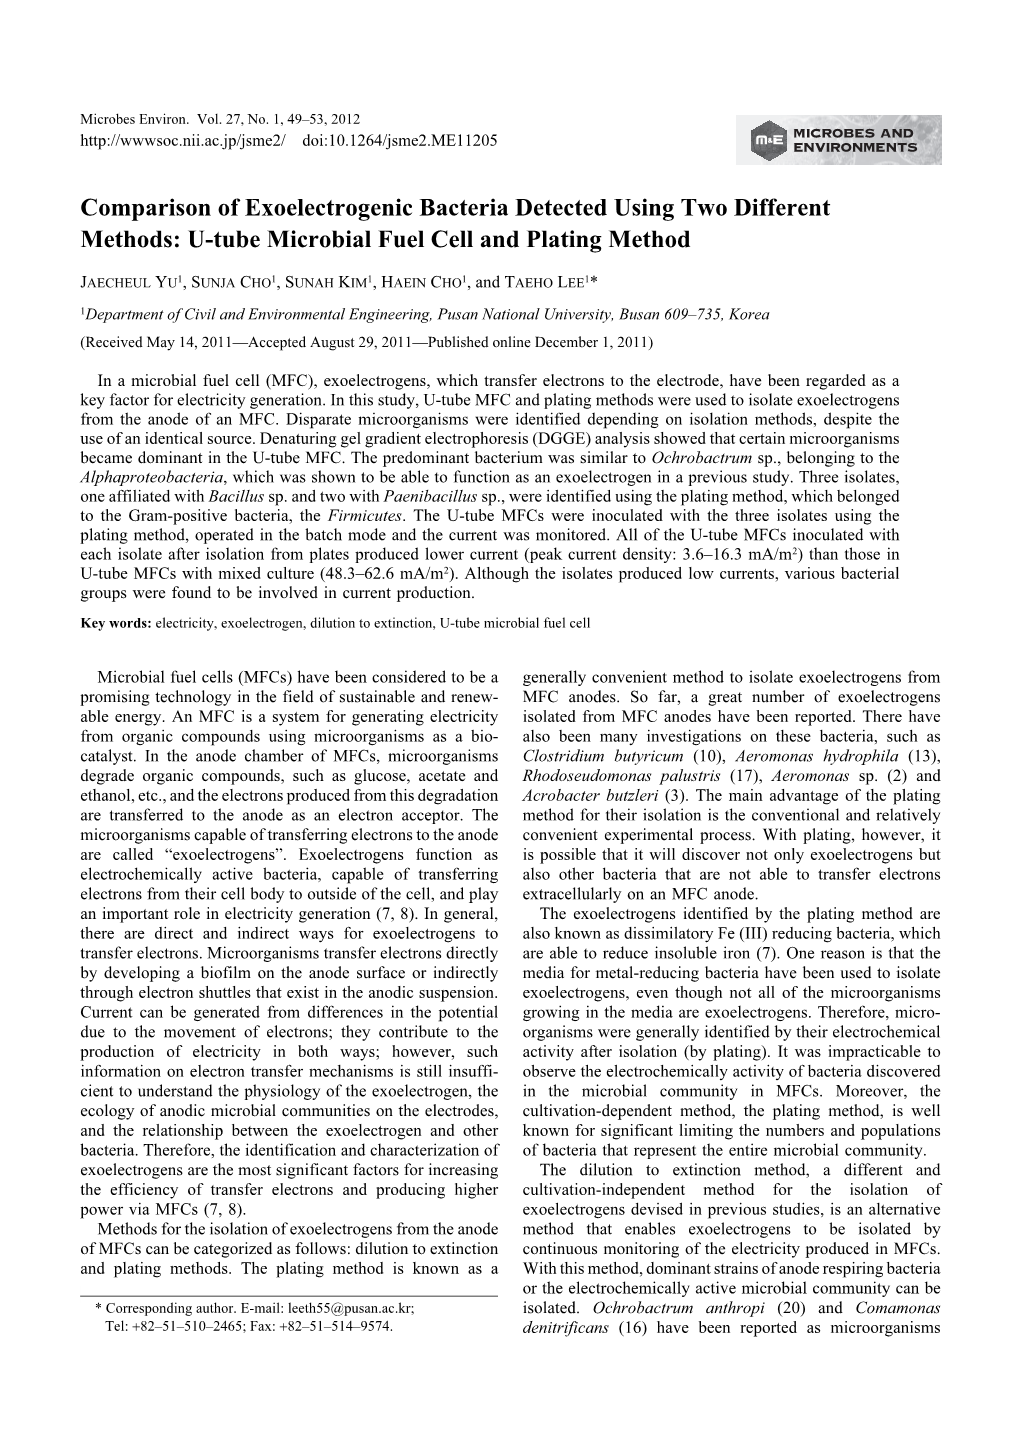 U-Tube Microbial Fuel Cell and Plating Method